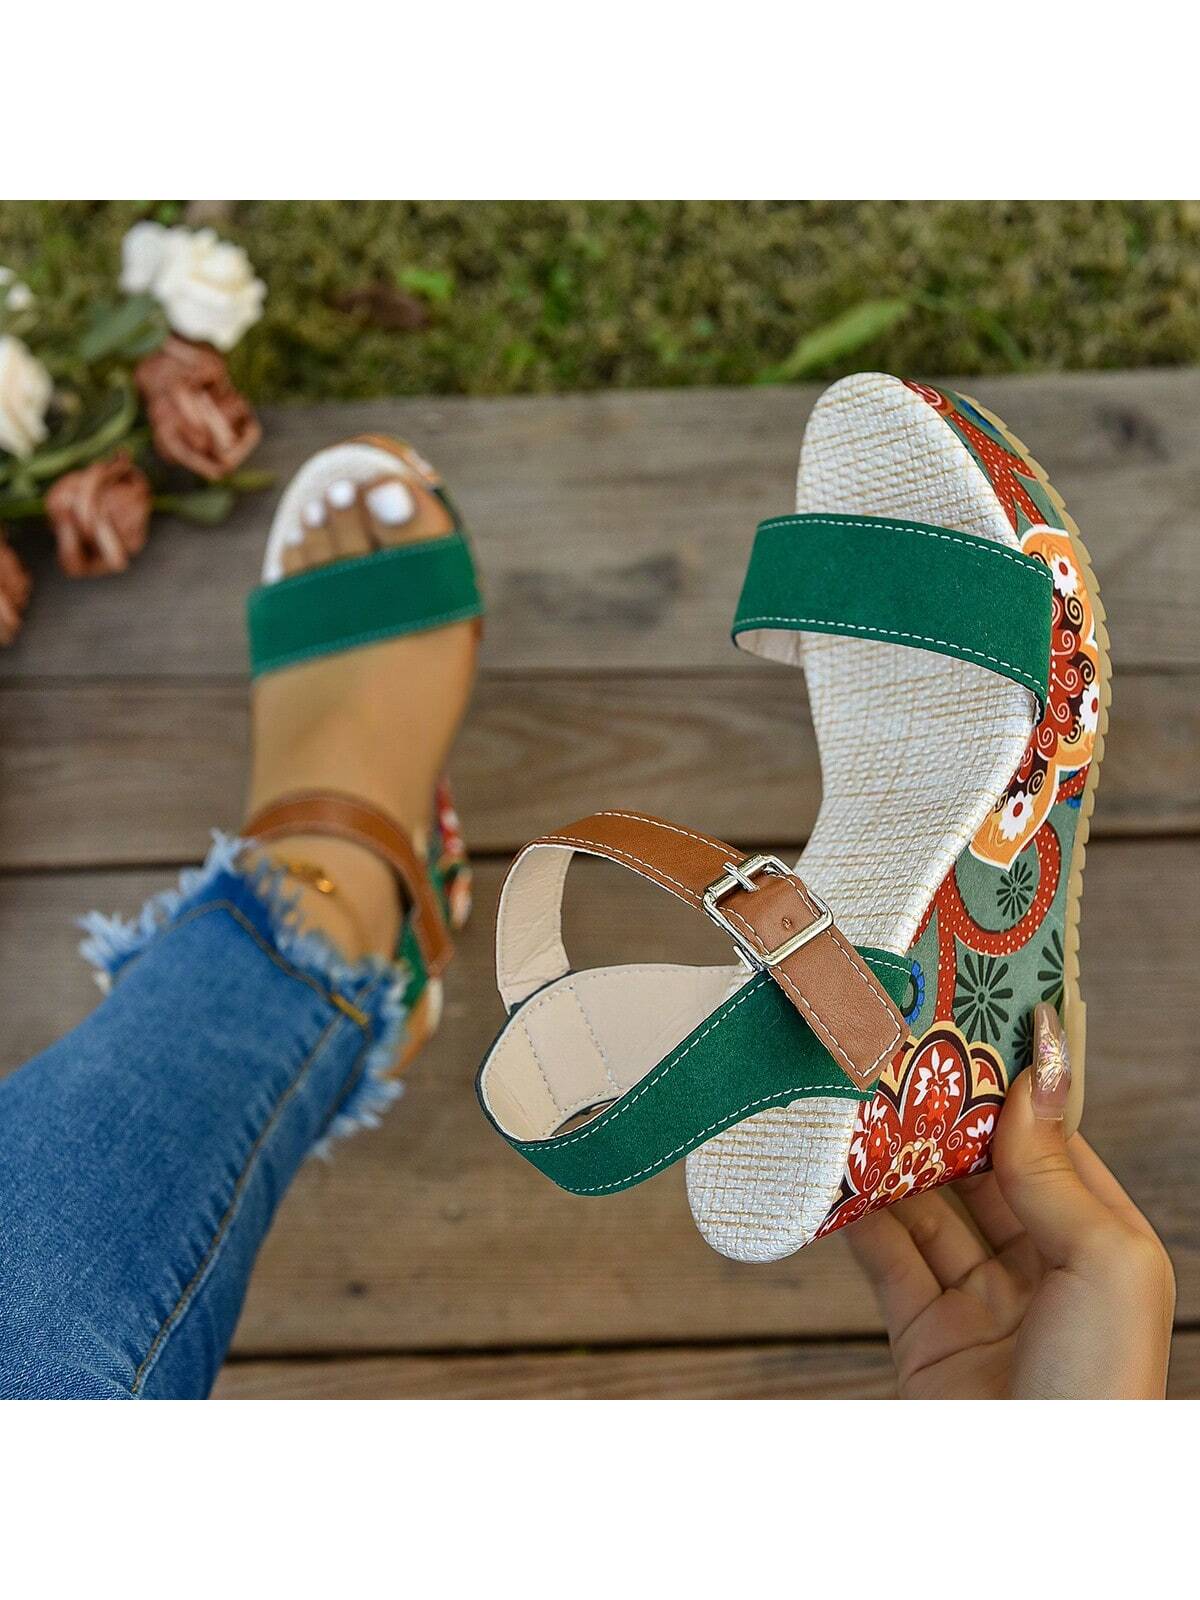 New Arrival Style Canvas High Heeled Wedge Sole Sandals